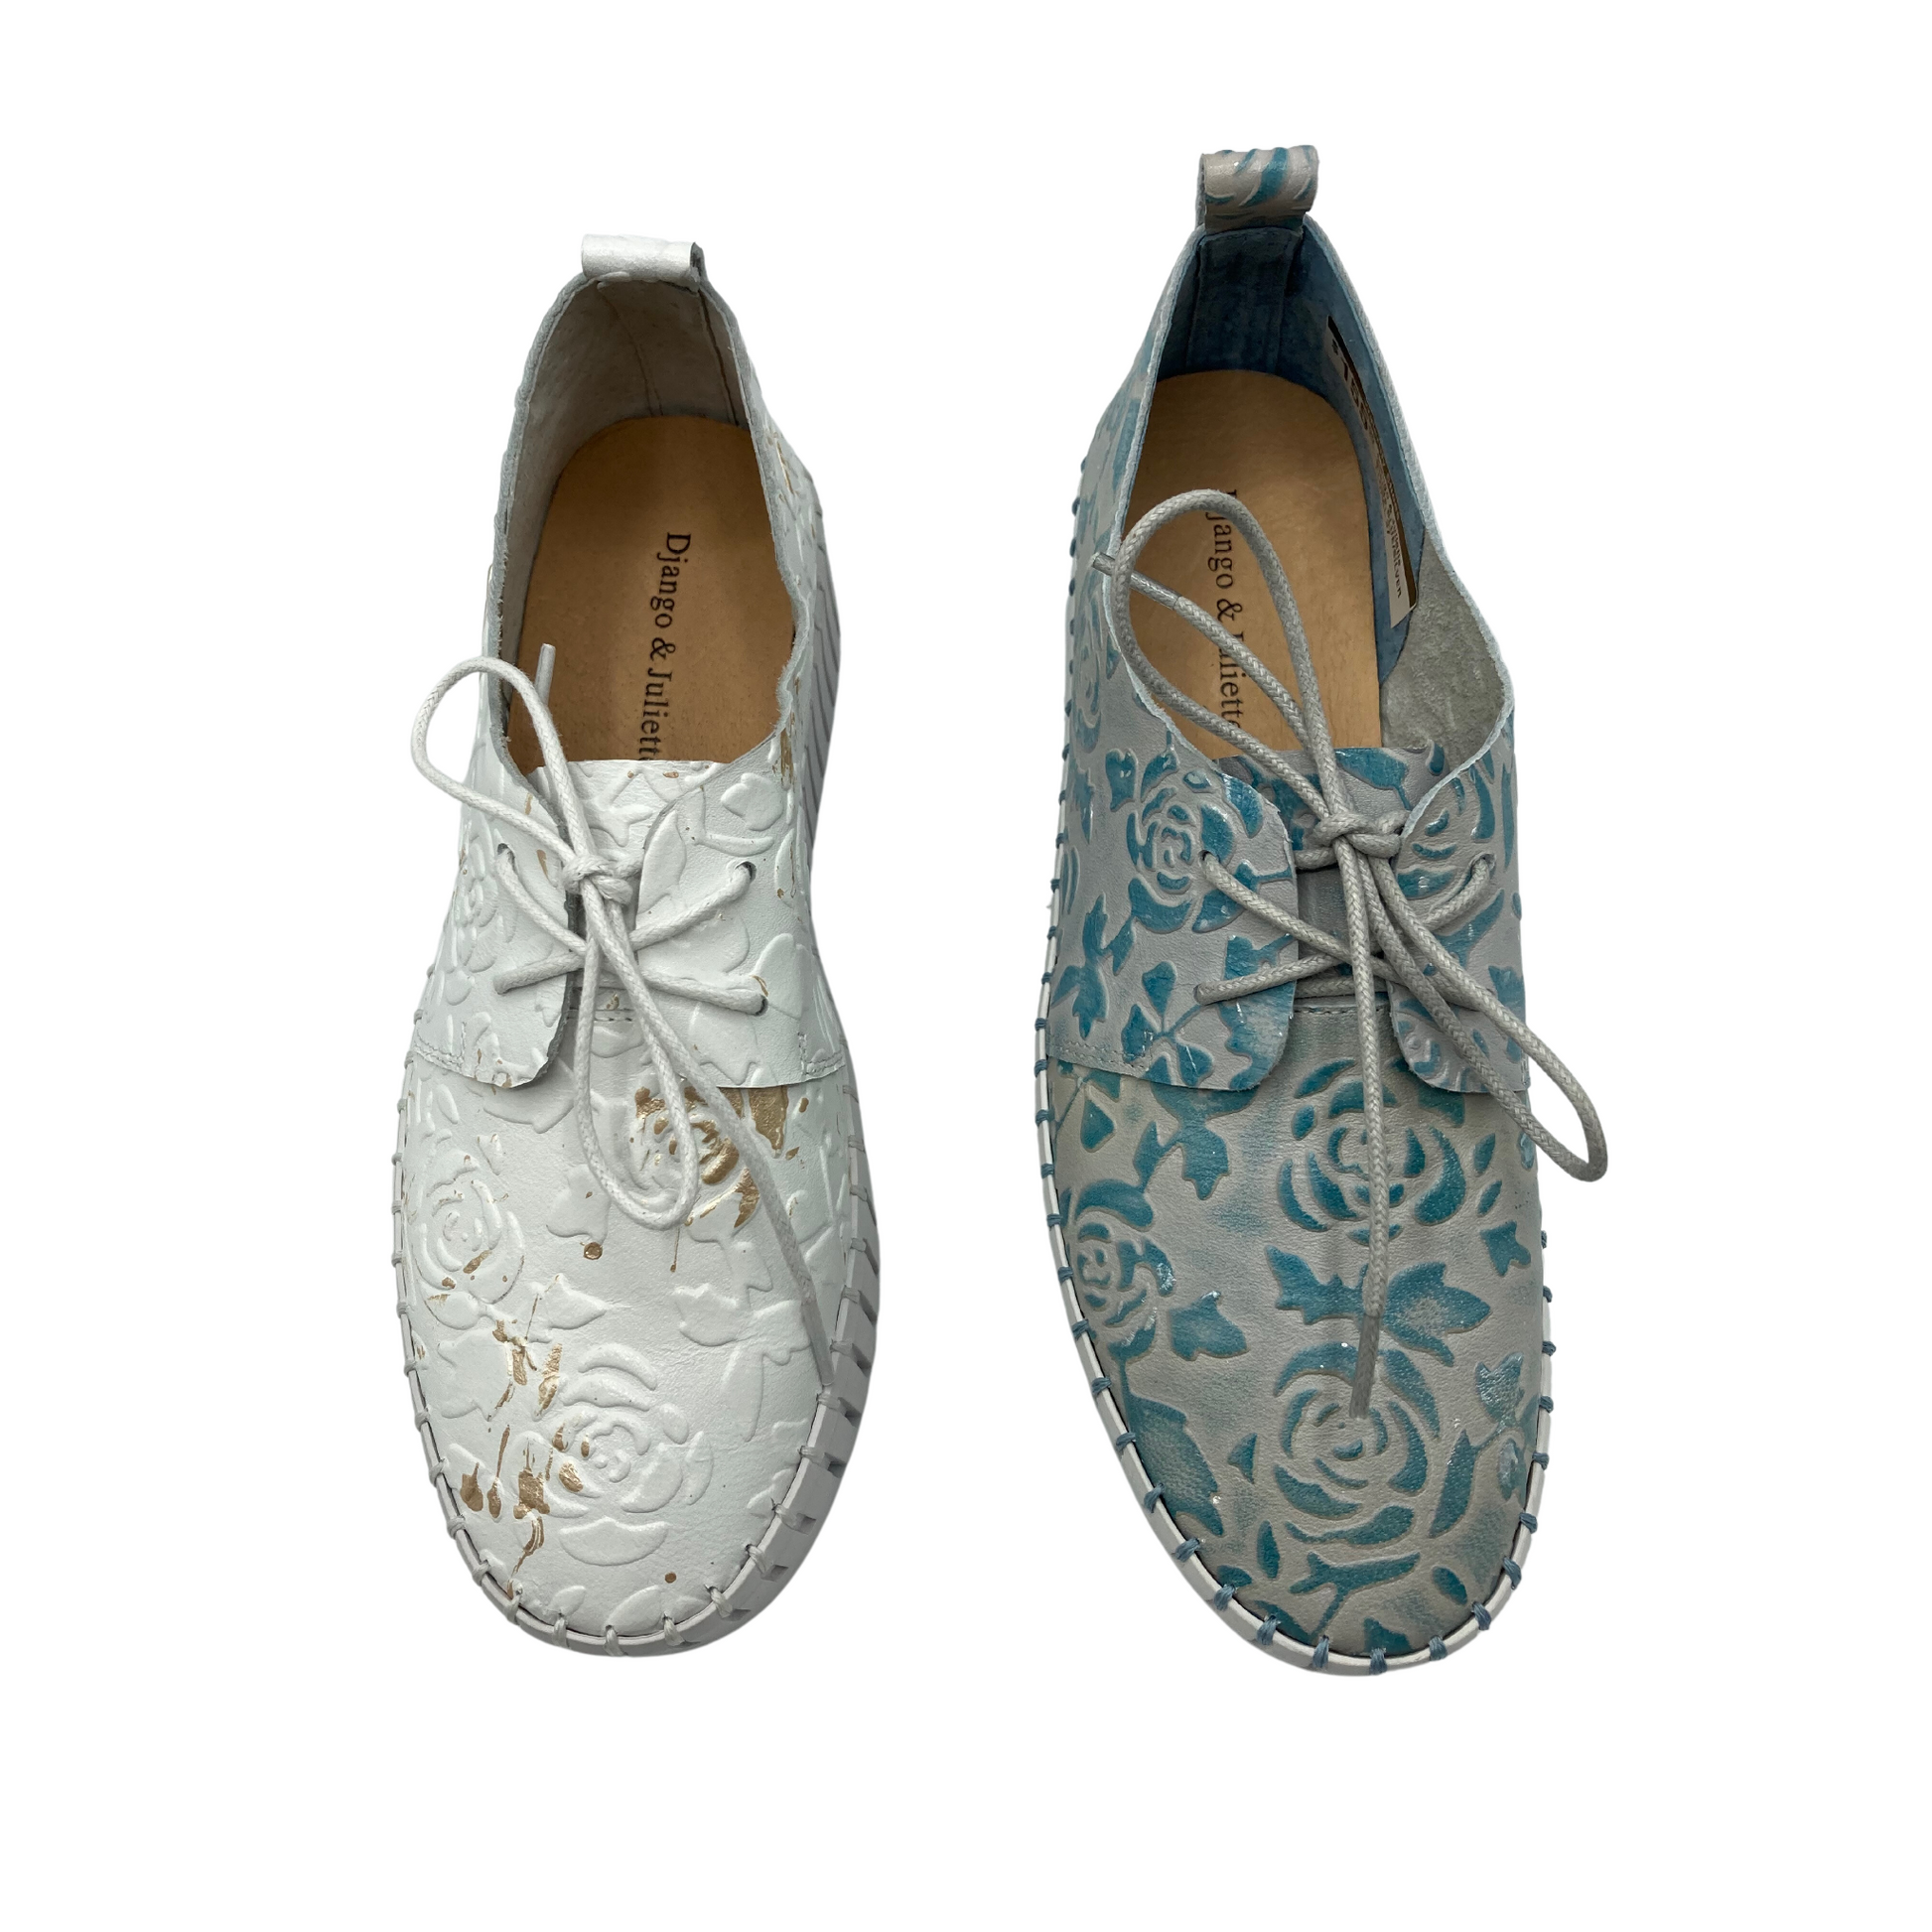 Top down view of unique sneaker/loafer style shoes.  Shown in white and a denim blue both with embossed flowers in the leather.